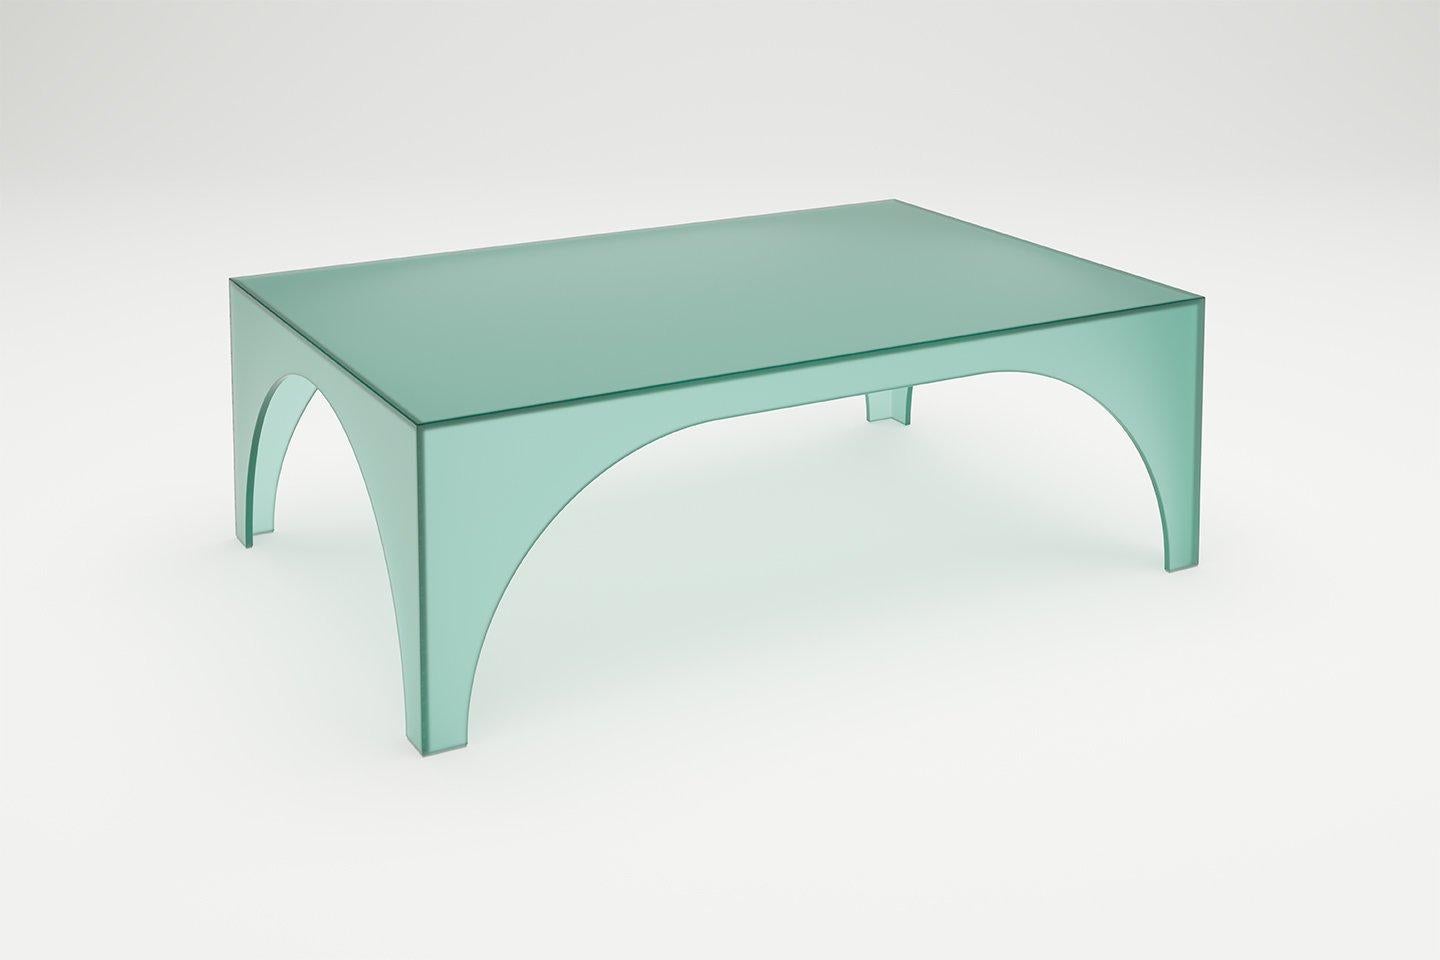 Satin Glass Blue Arc Oblong coffee table by Sebastian Scherer.
Material: satin glass.
Also available in glass, clear glass, marble.
Dimensions: 105 x 70 x 35 cm
Colour: blue
Also available in bronze, black, green, white. 

The Arc series is